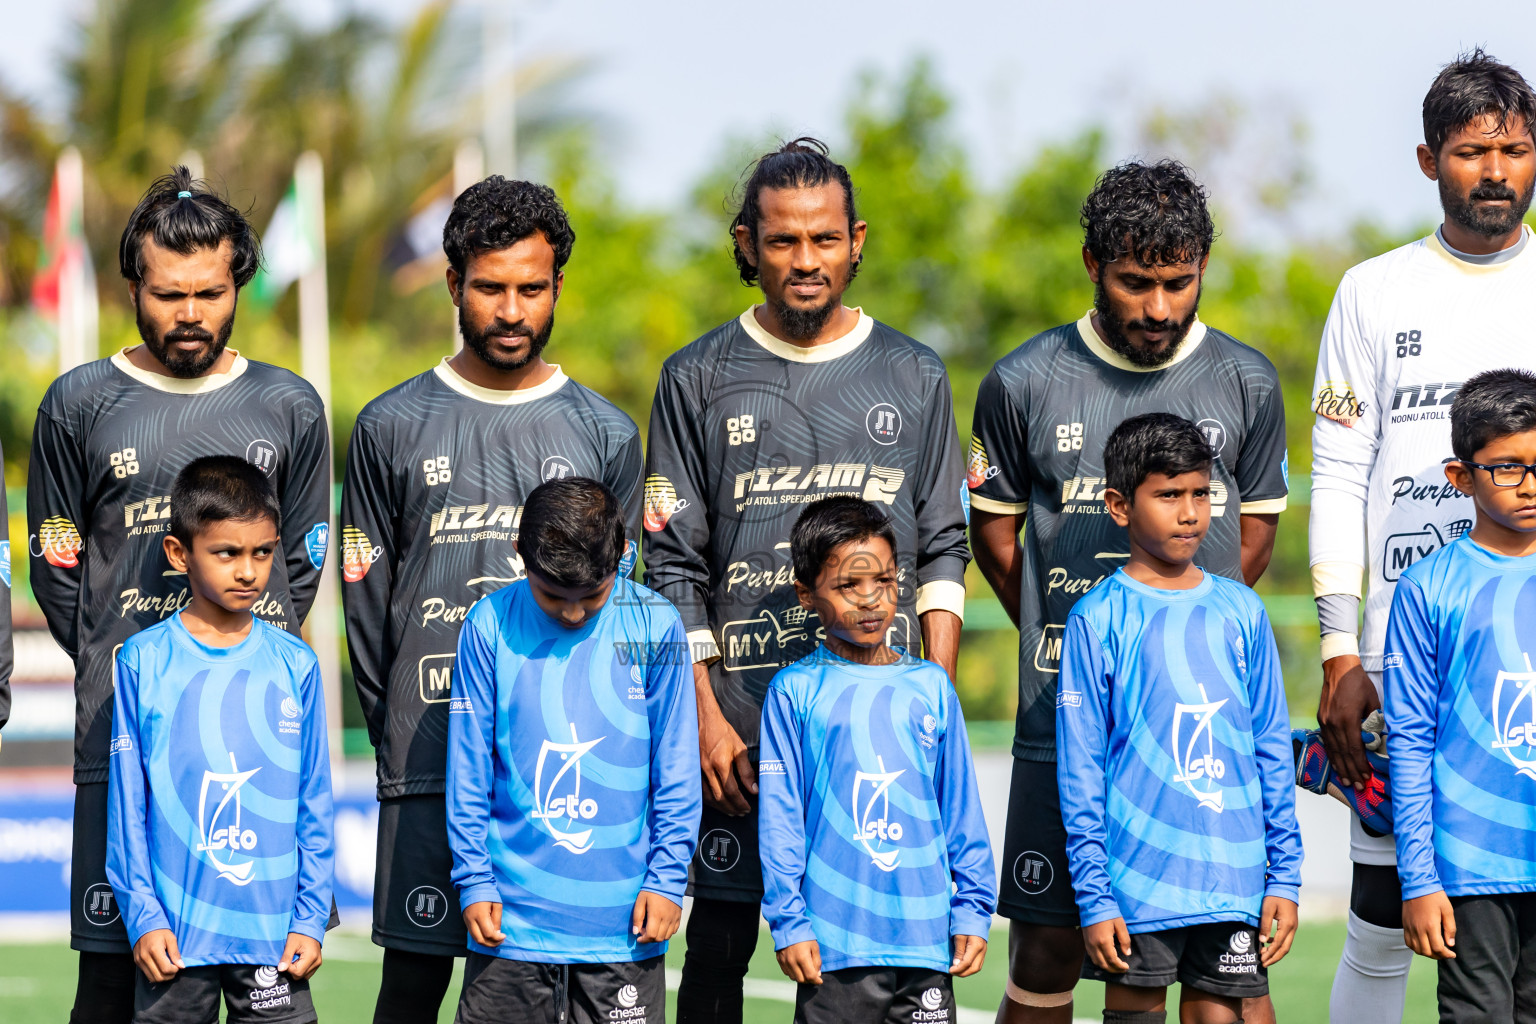 JT Sports vs Kanmathi Juniors from Final of Manadhoo Council Cup 2024 in N Manadhoo Maldives on Tuesday, 27th February 2023. Photos: Nausham Waheed / images.mv